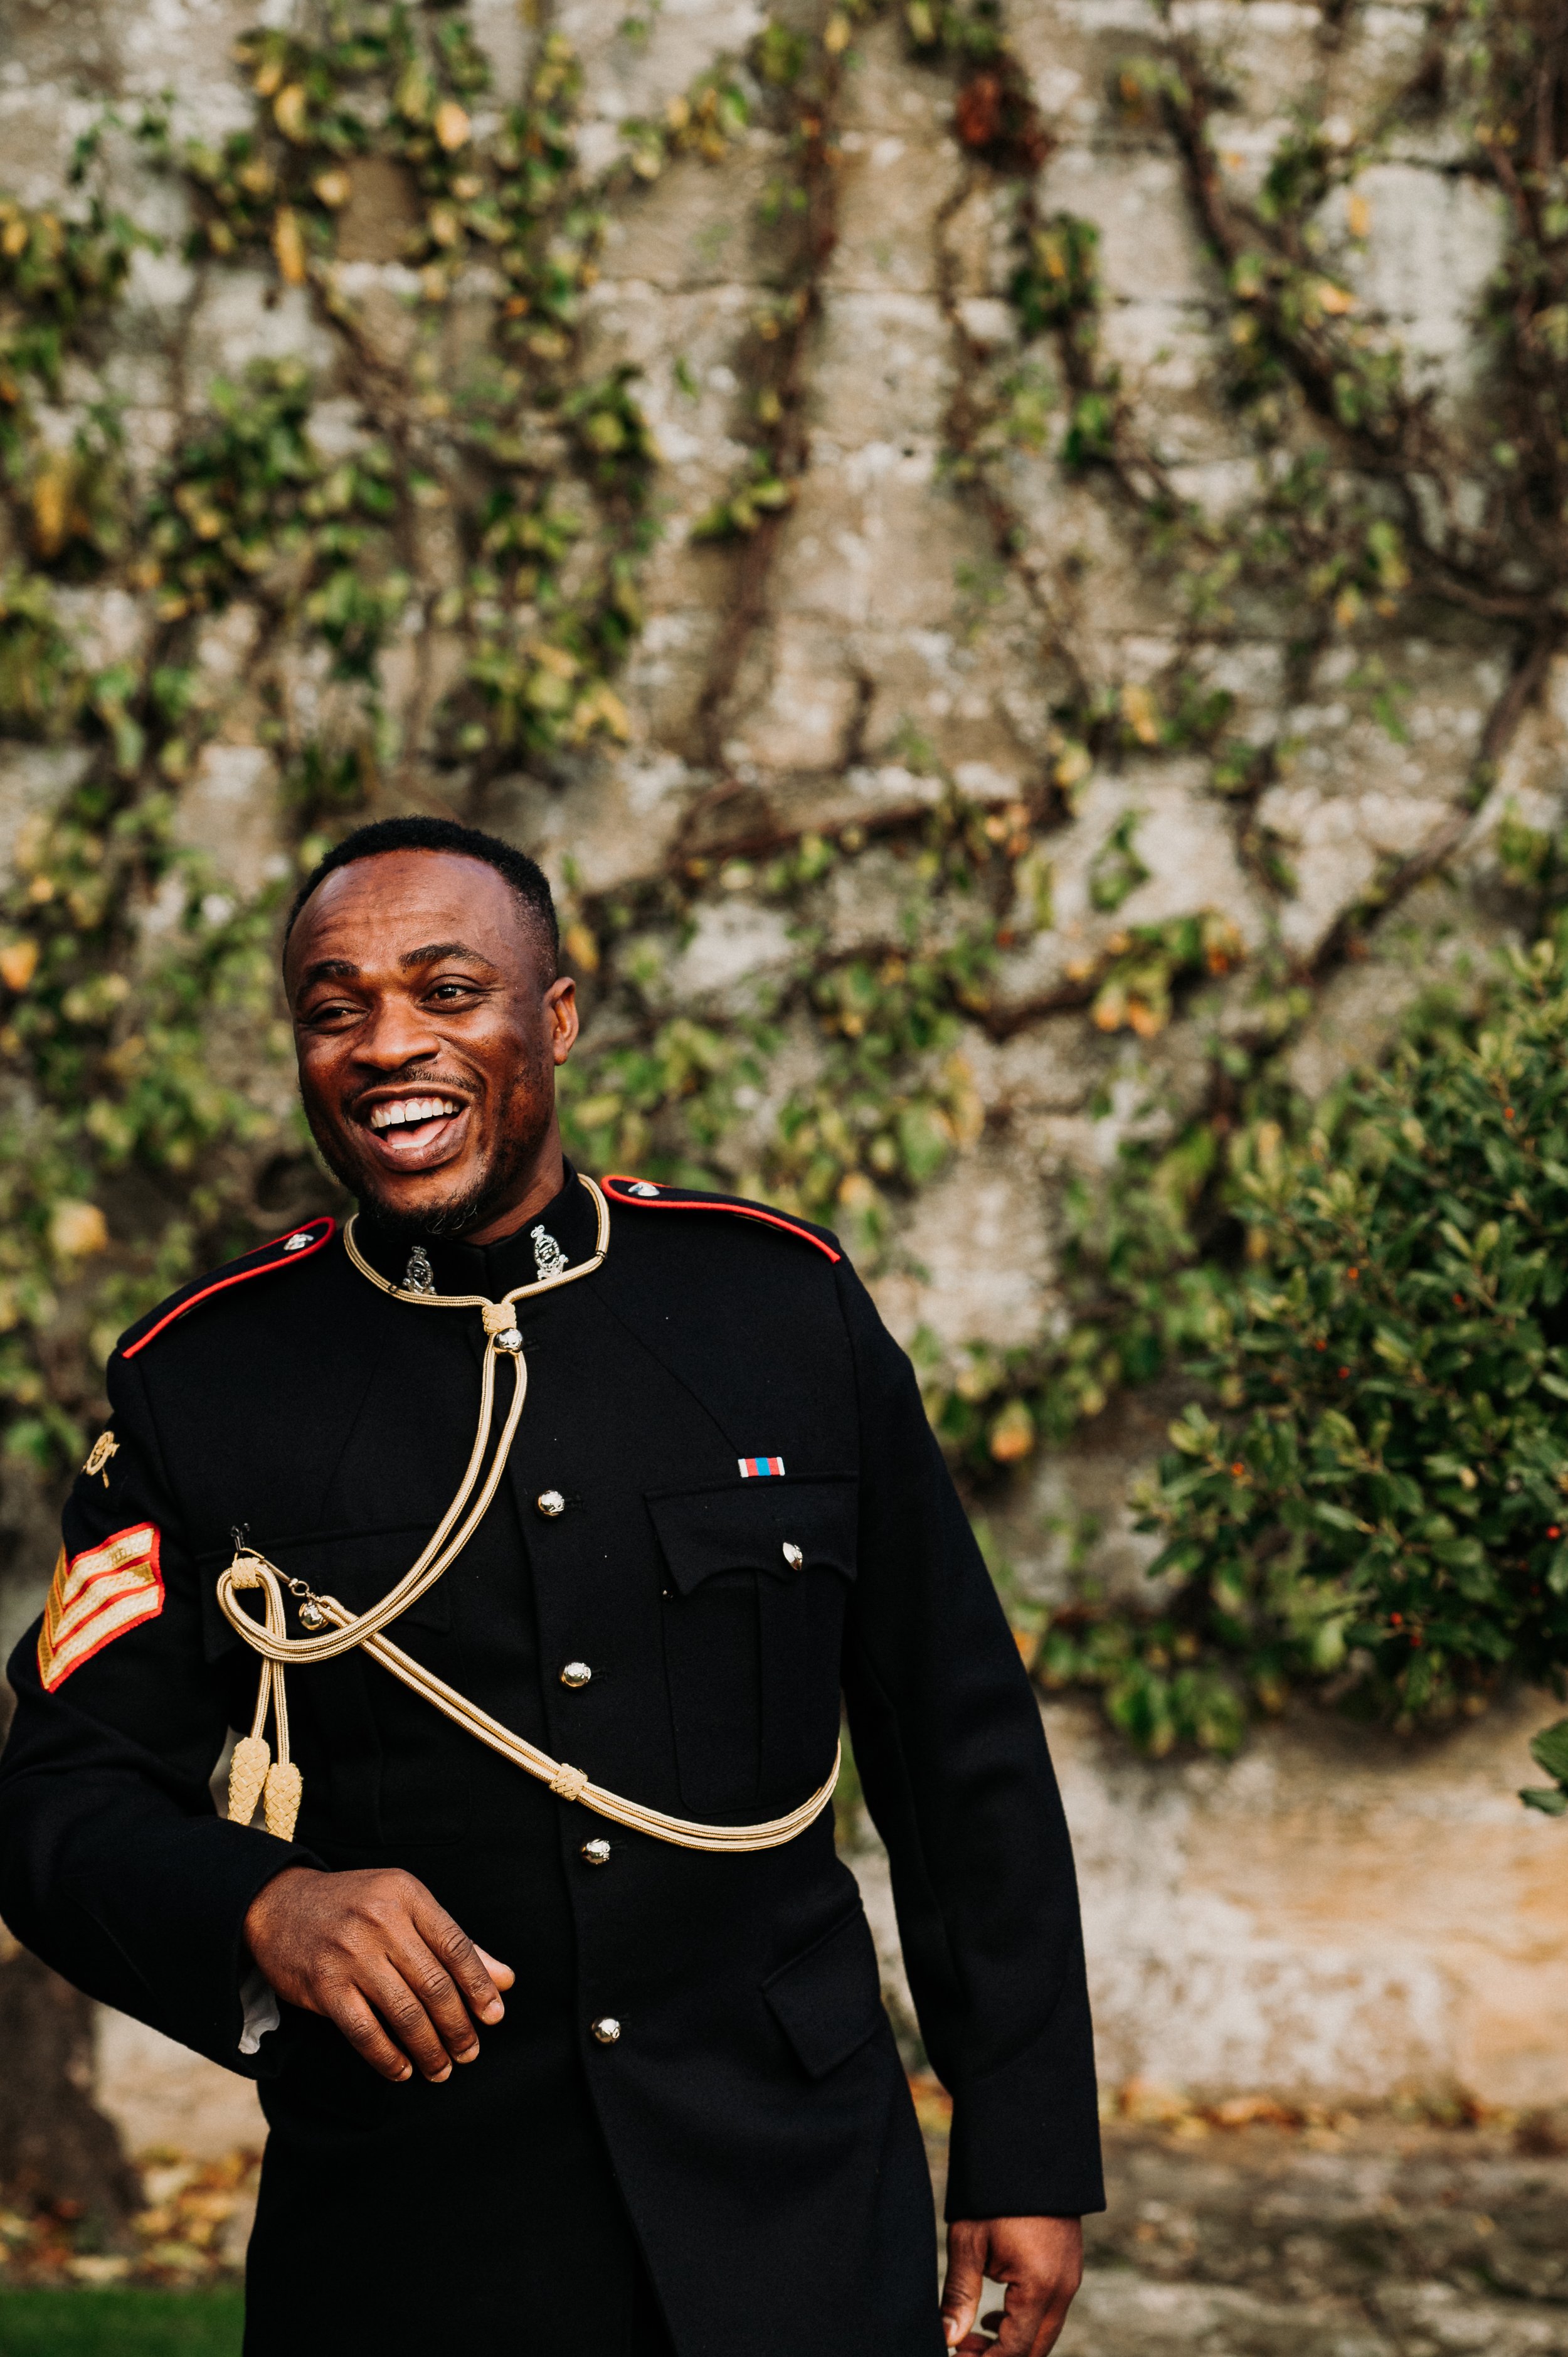 A member of the groom's sword guard in full uniform shares a laugh on the morning of the wedding at Sneaton Castle, Whitby.